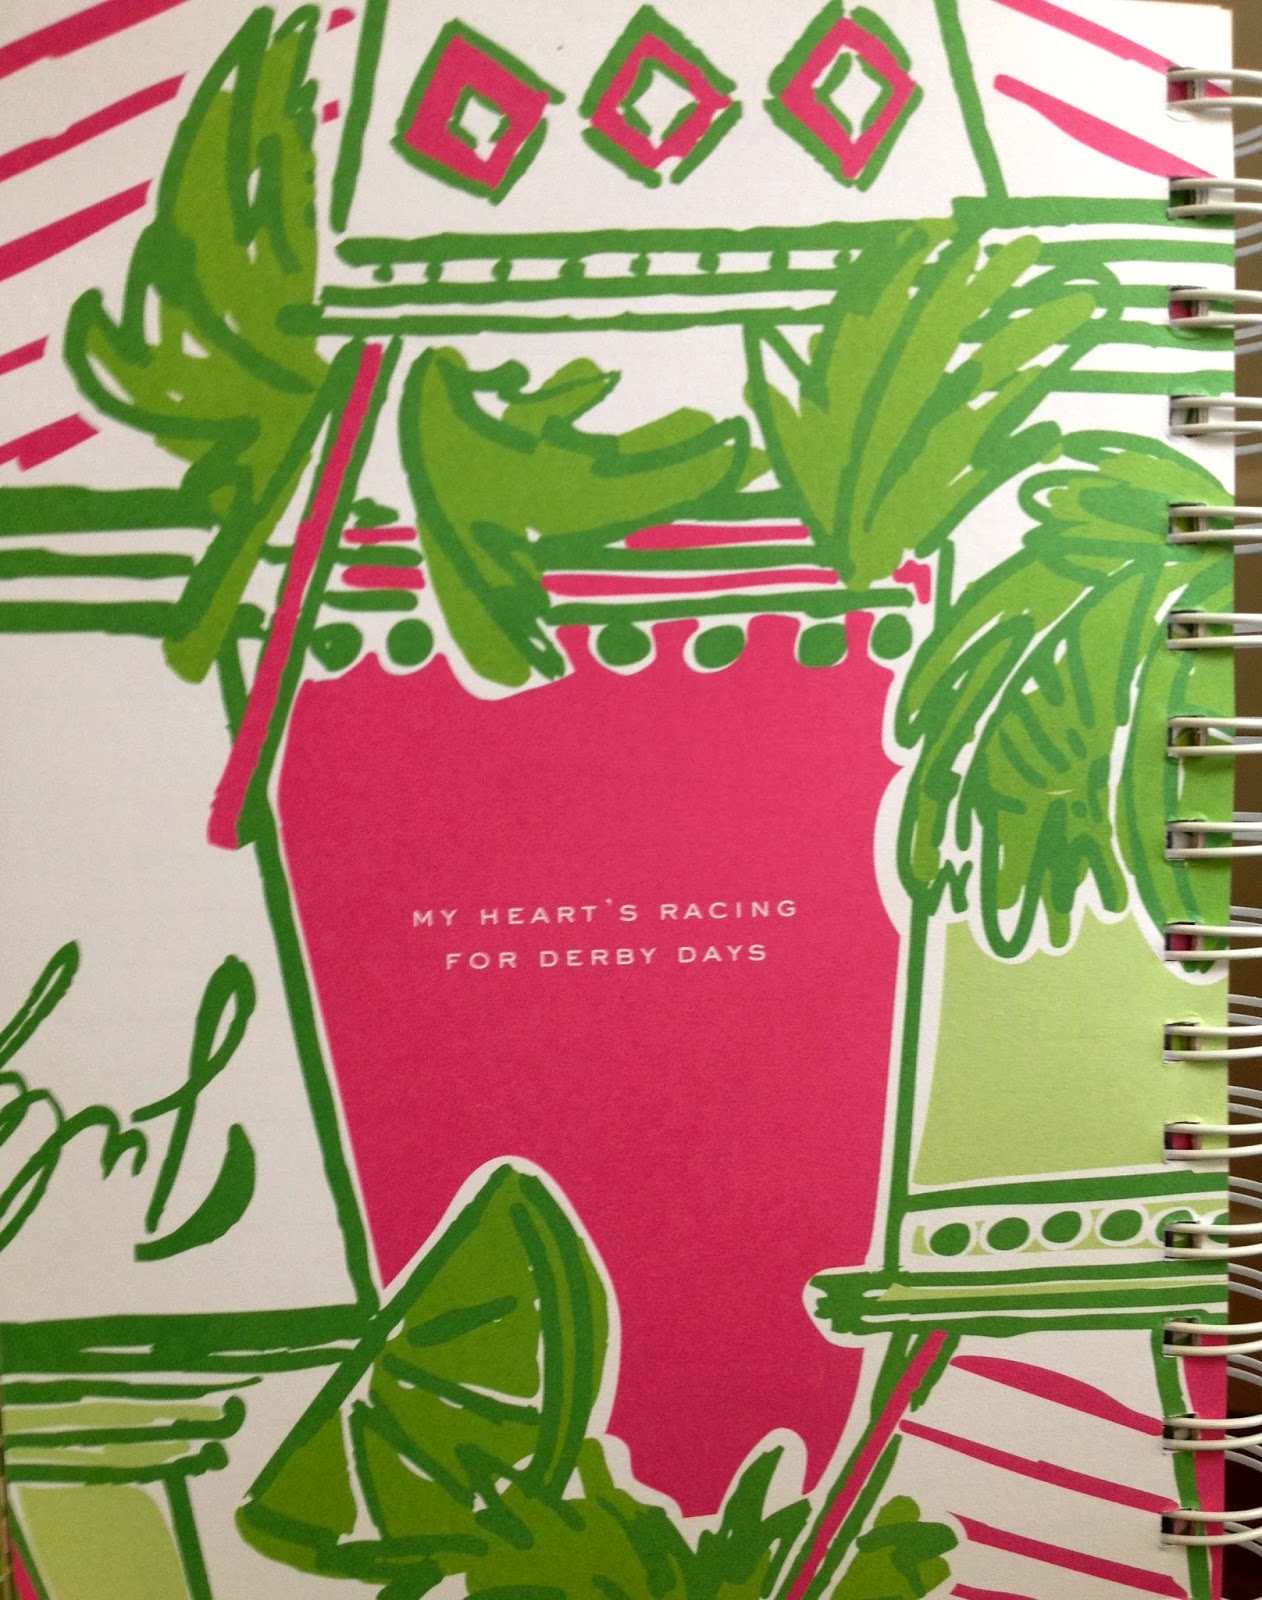 Tuesday Trends: Lilly Pulitzer on Rue La La - Sweet Southern Prep